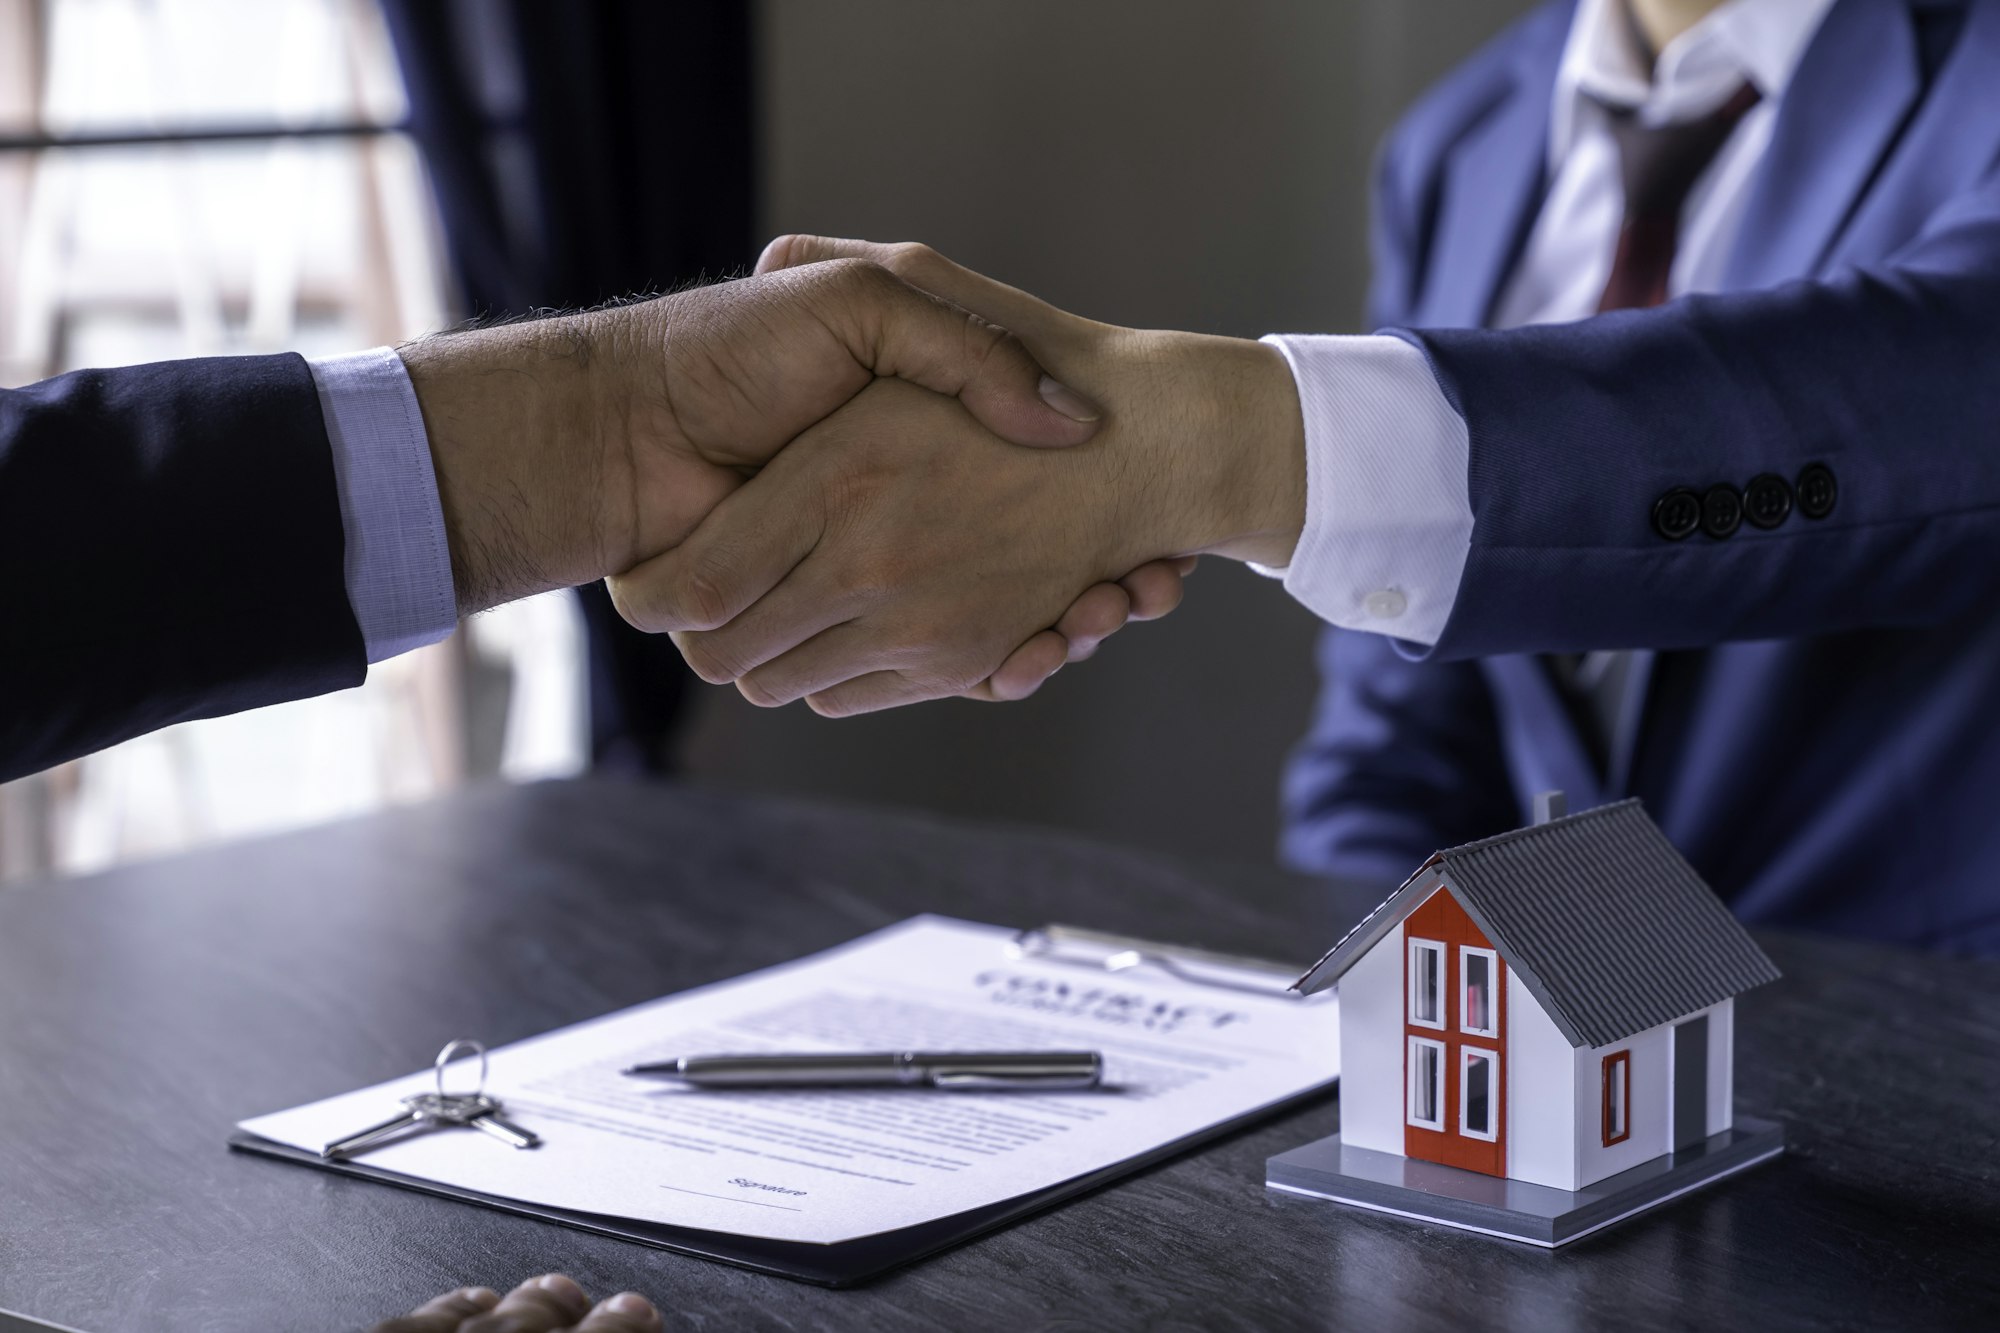 Real estate brokers are shaking hands to congratulate buyers after agreeing to insure and buy a hous